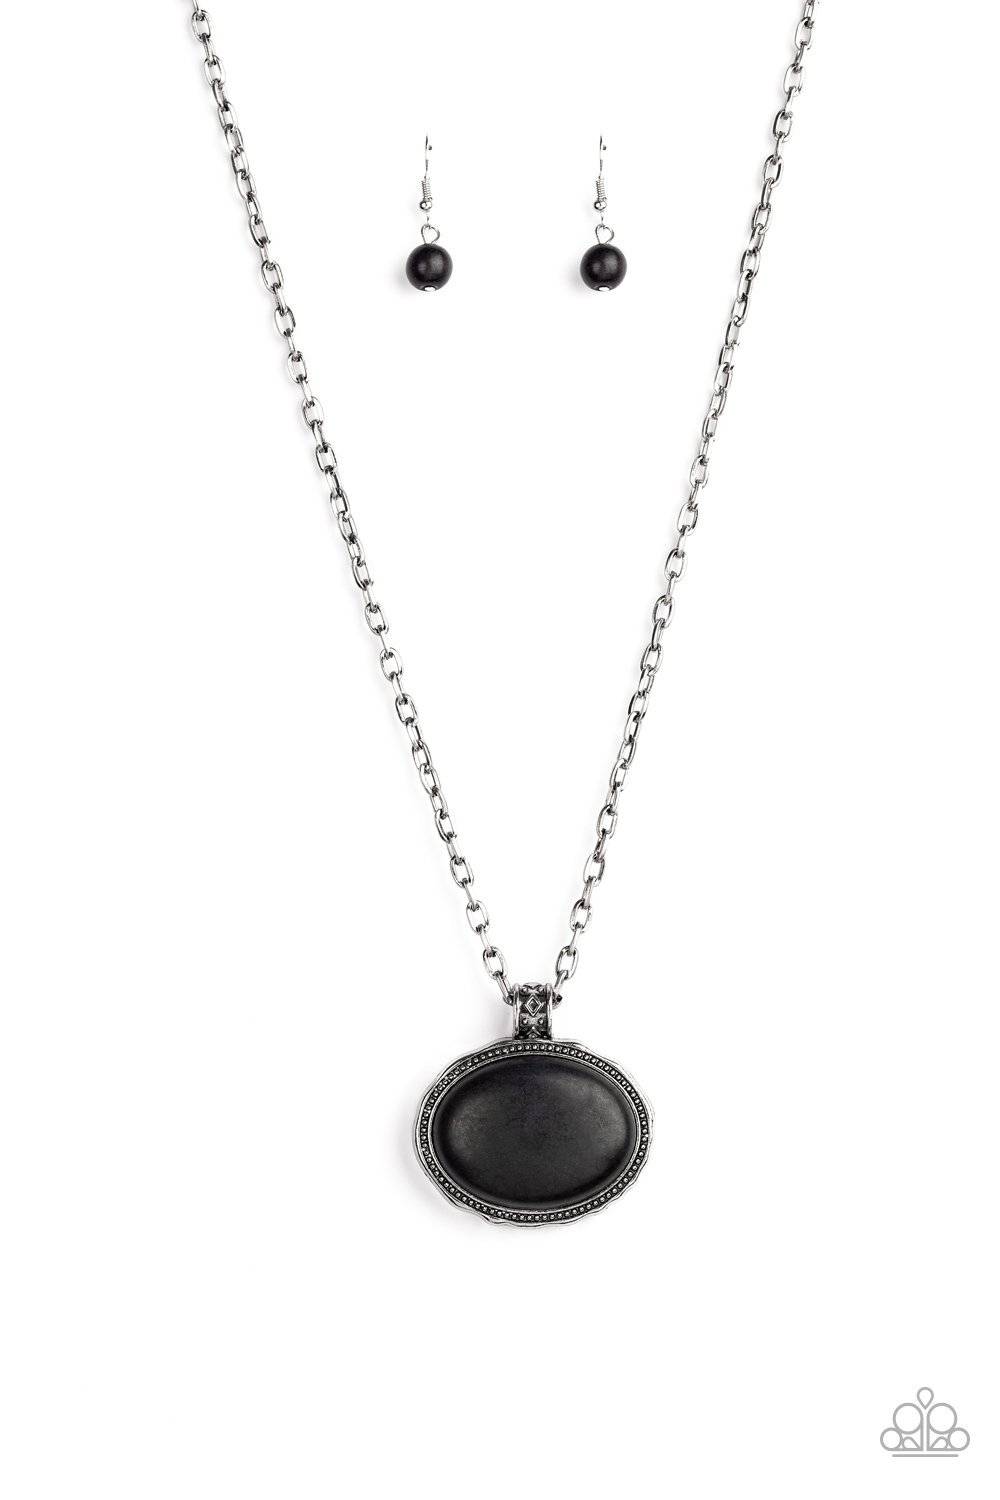 A382 - Sedimentary Colors Black Necklace by Paparazzi Accessories on Fancy5Fashion.com